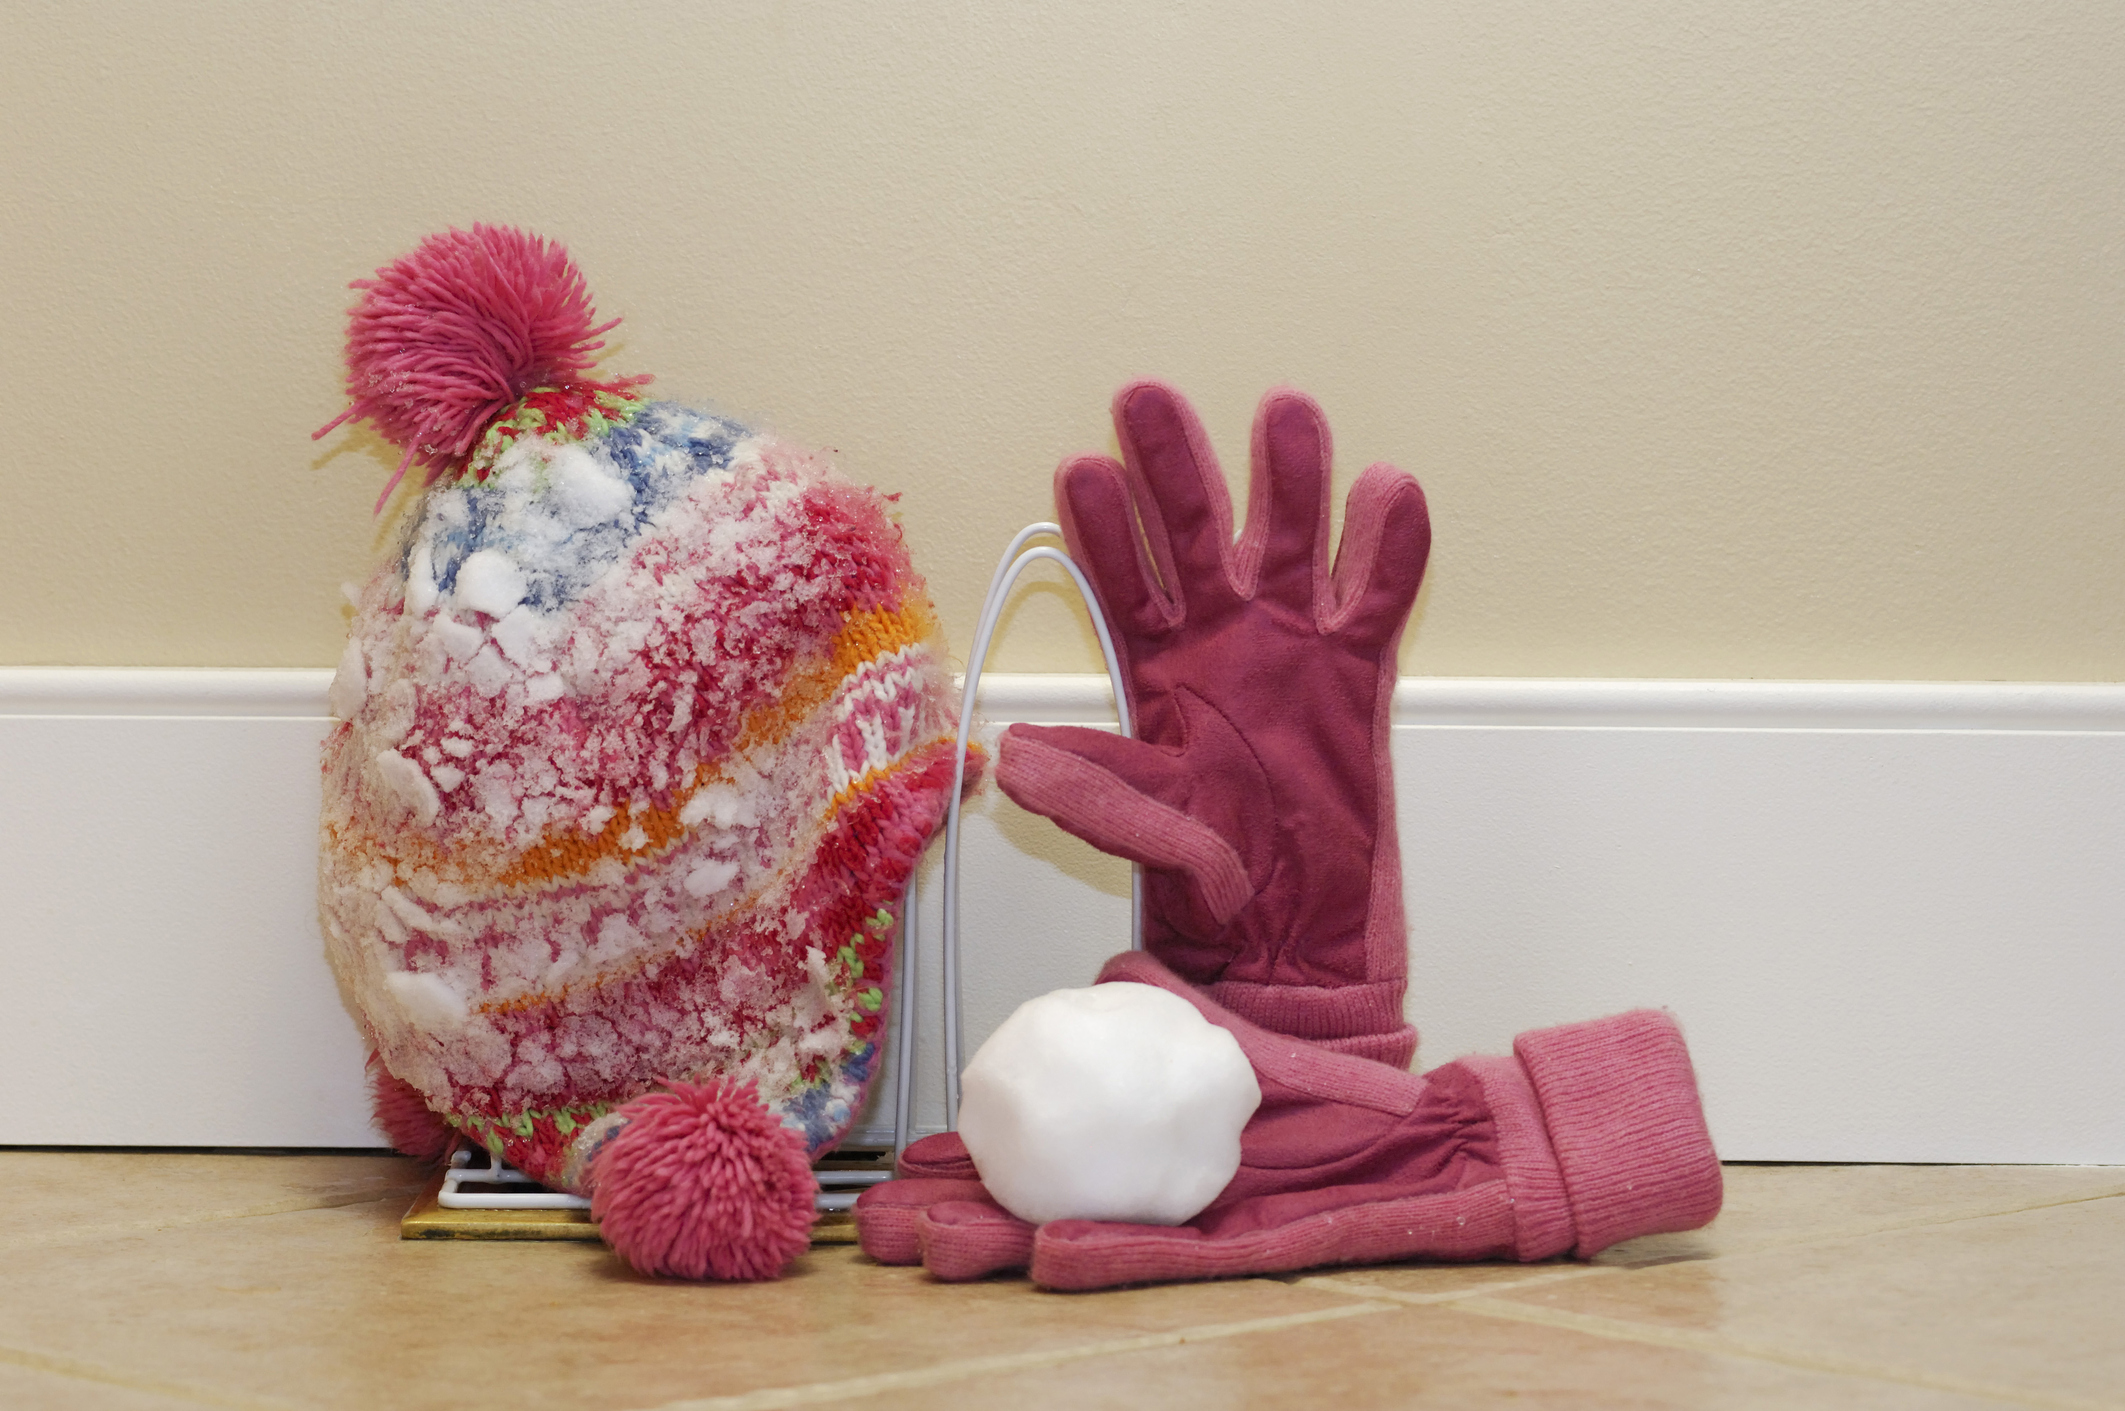 Winter hat and gloves warming on heating vent